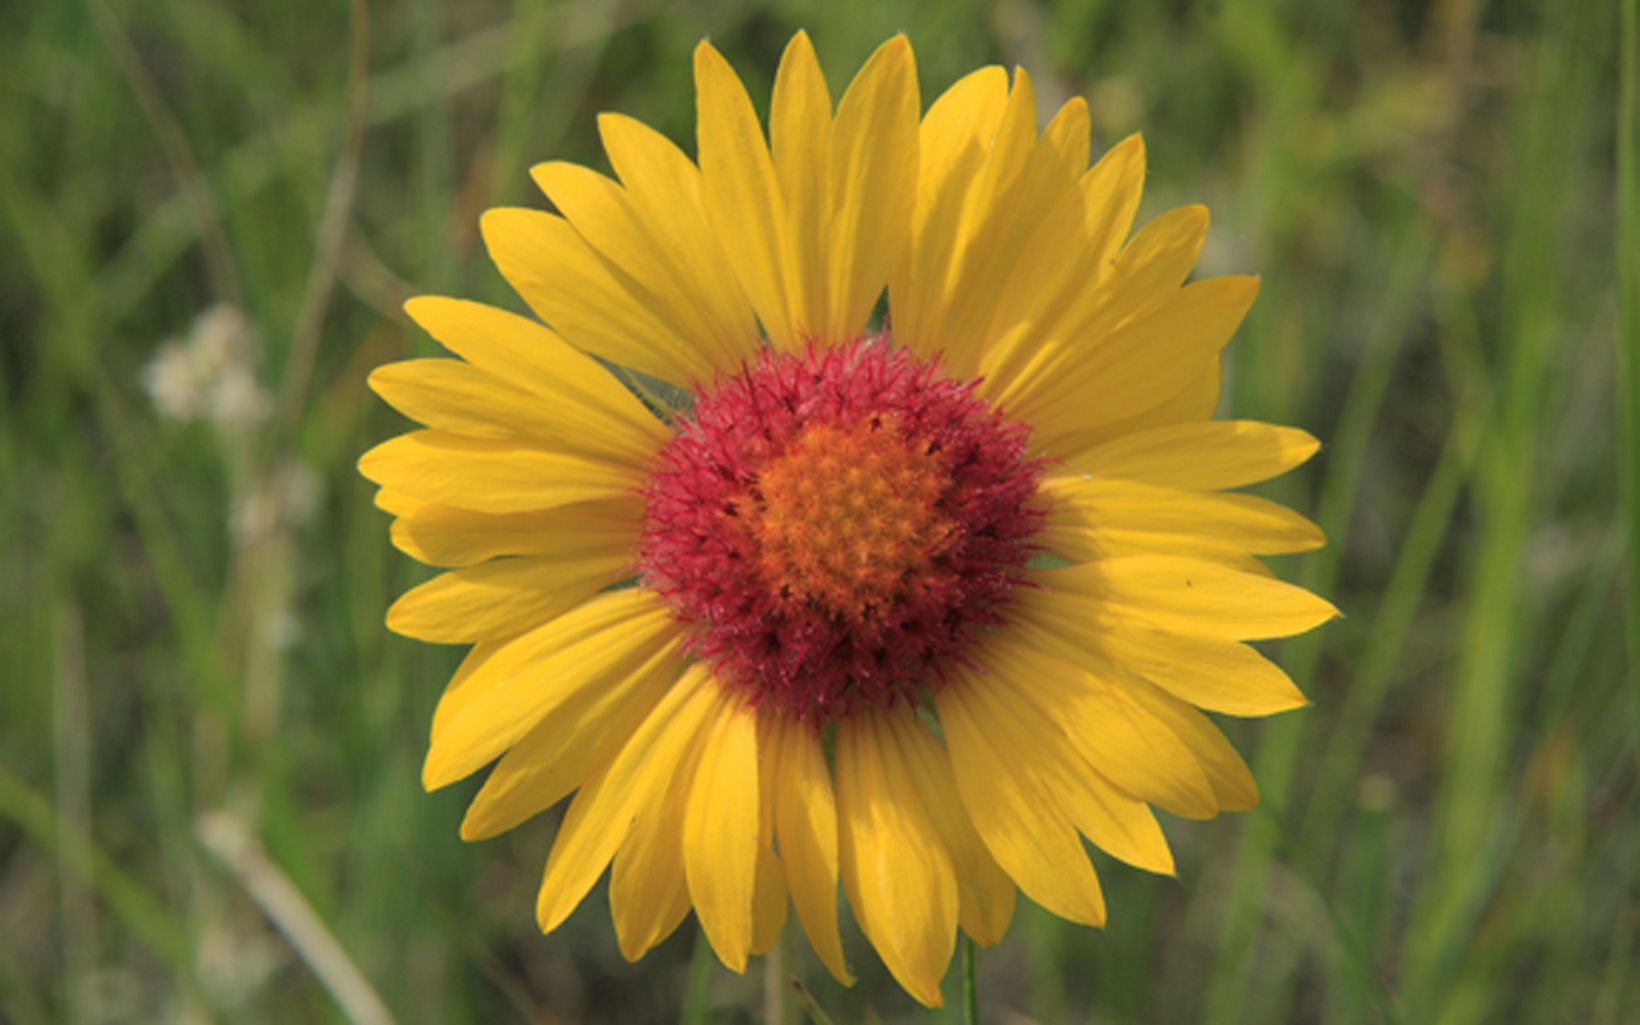 Part of the sunflower family, Gaillardia flowers are typically bright red with yellow tips.